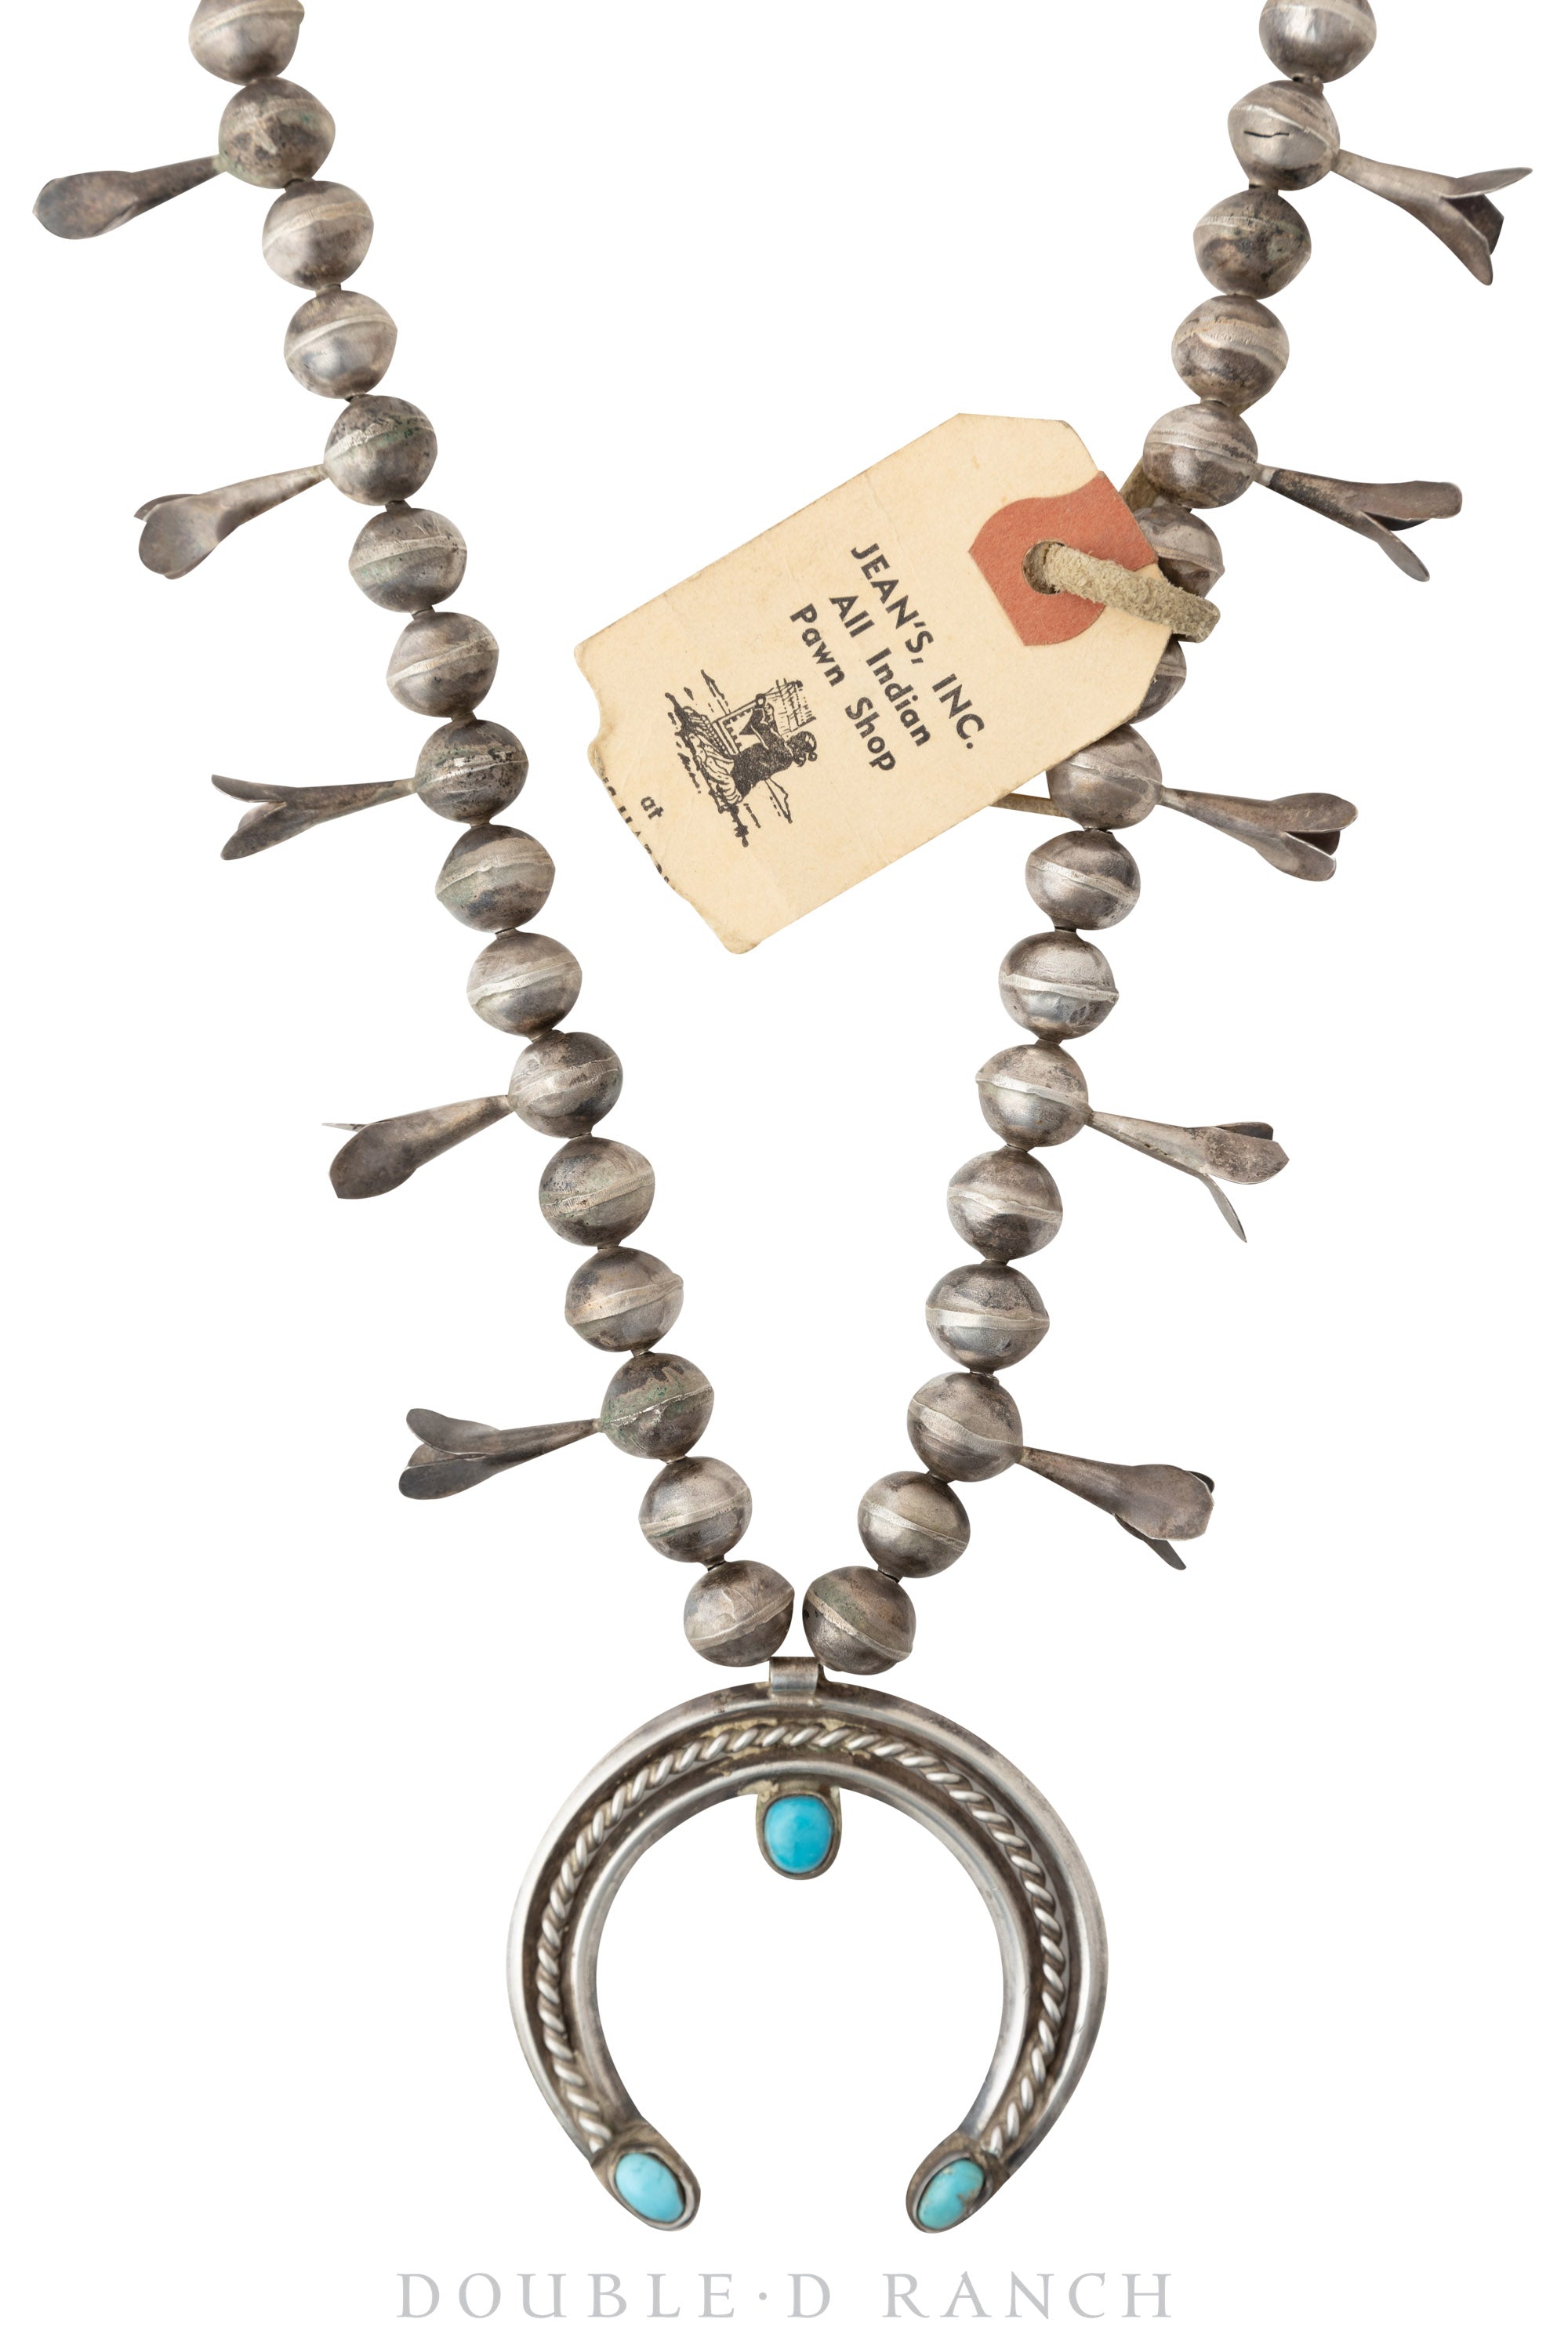 Necklace, Squash Blossom, Turquoise, with Pawn Ticket, Vintage ‘40s, 1959